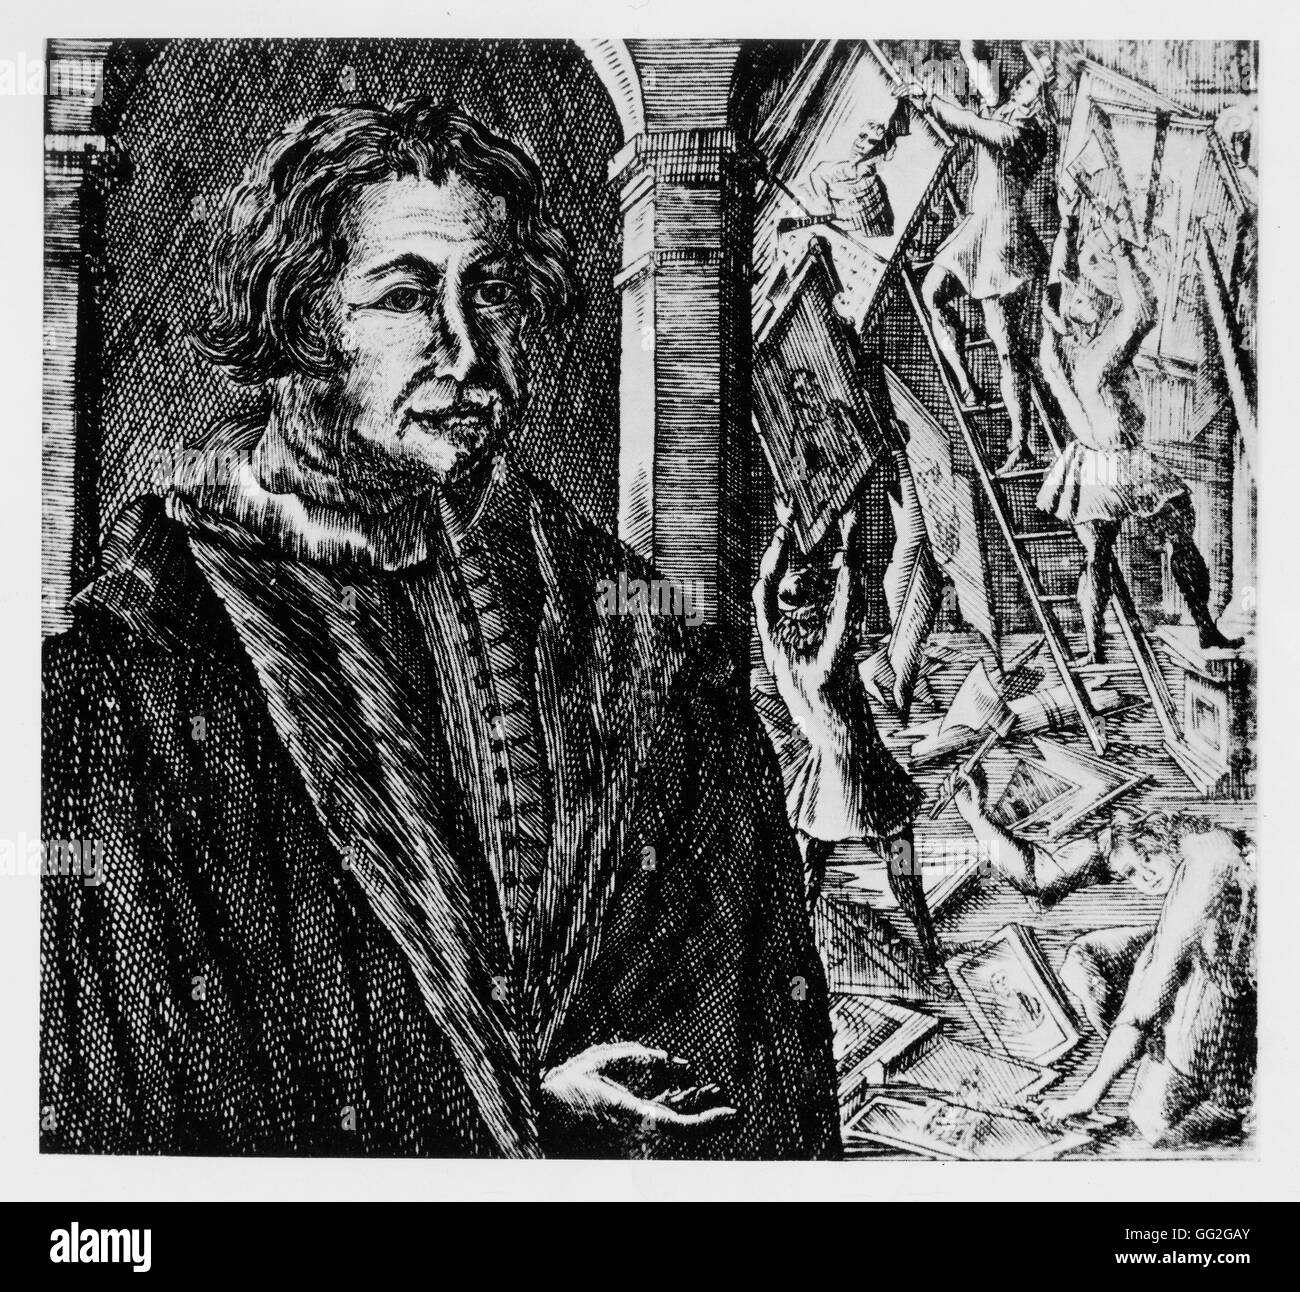 Andreas Rudolf Bodenstein Karlstadt (c.1480-1541) and the destruction of religious imagery (iconoclasm). Woocut. Stock Photo